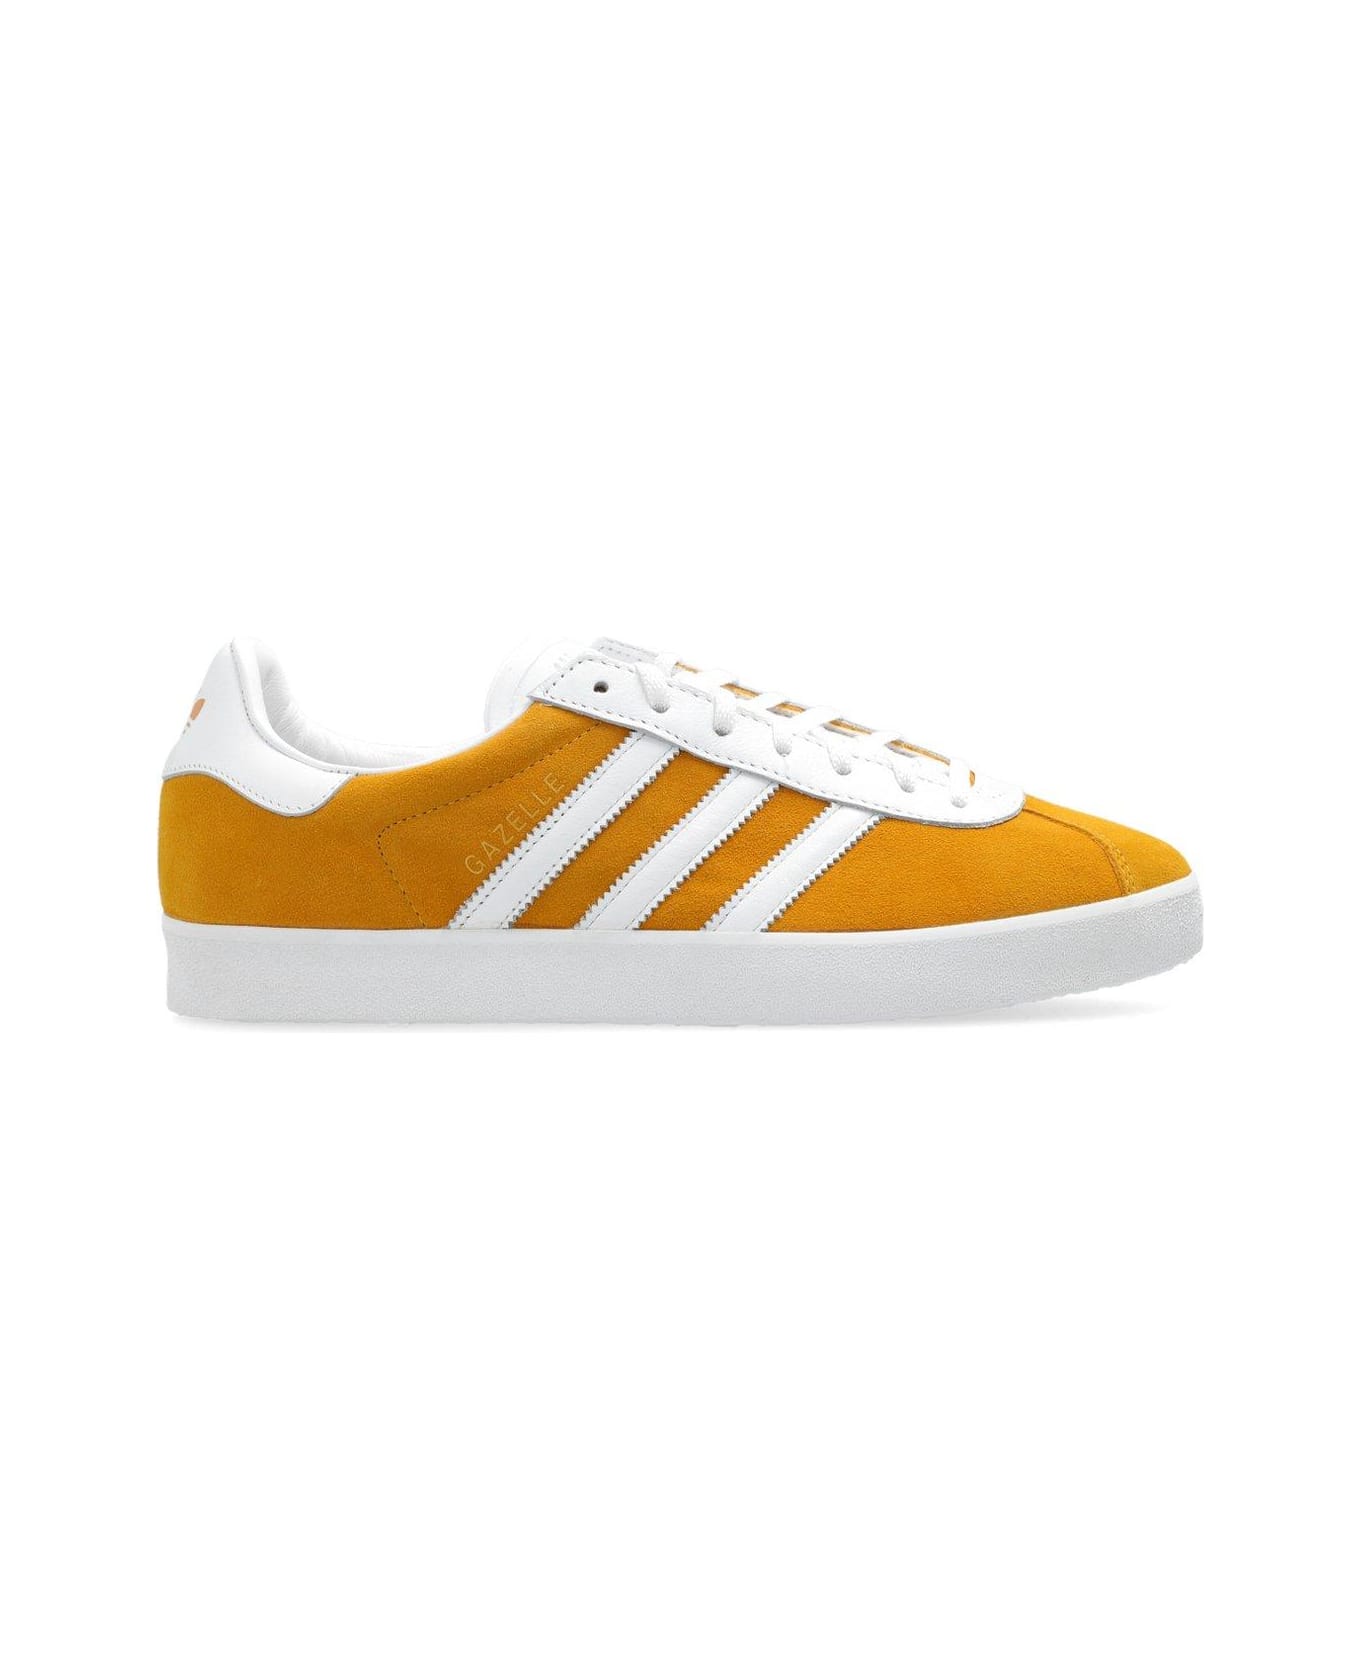 Adidas Gazelle 85 Lace-up Sneakers - Yellow